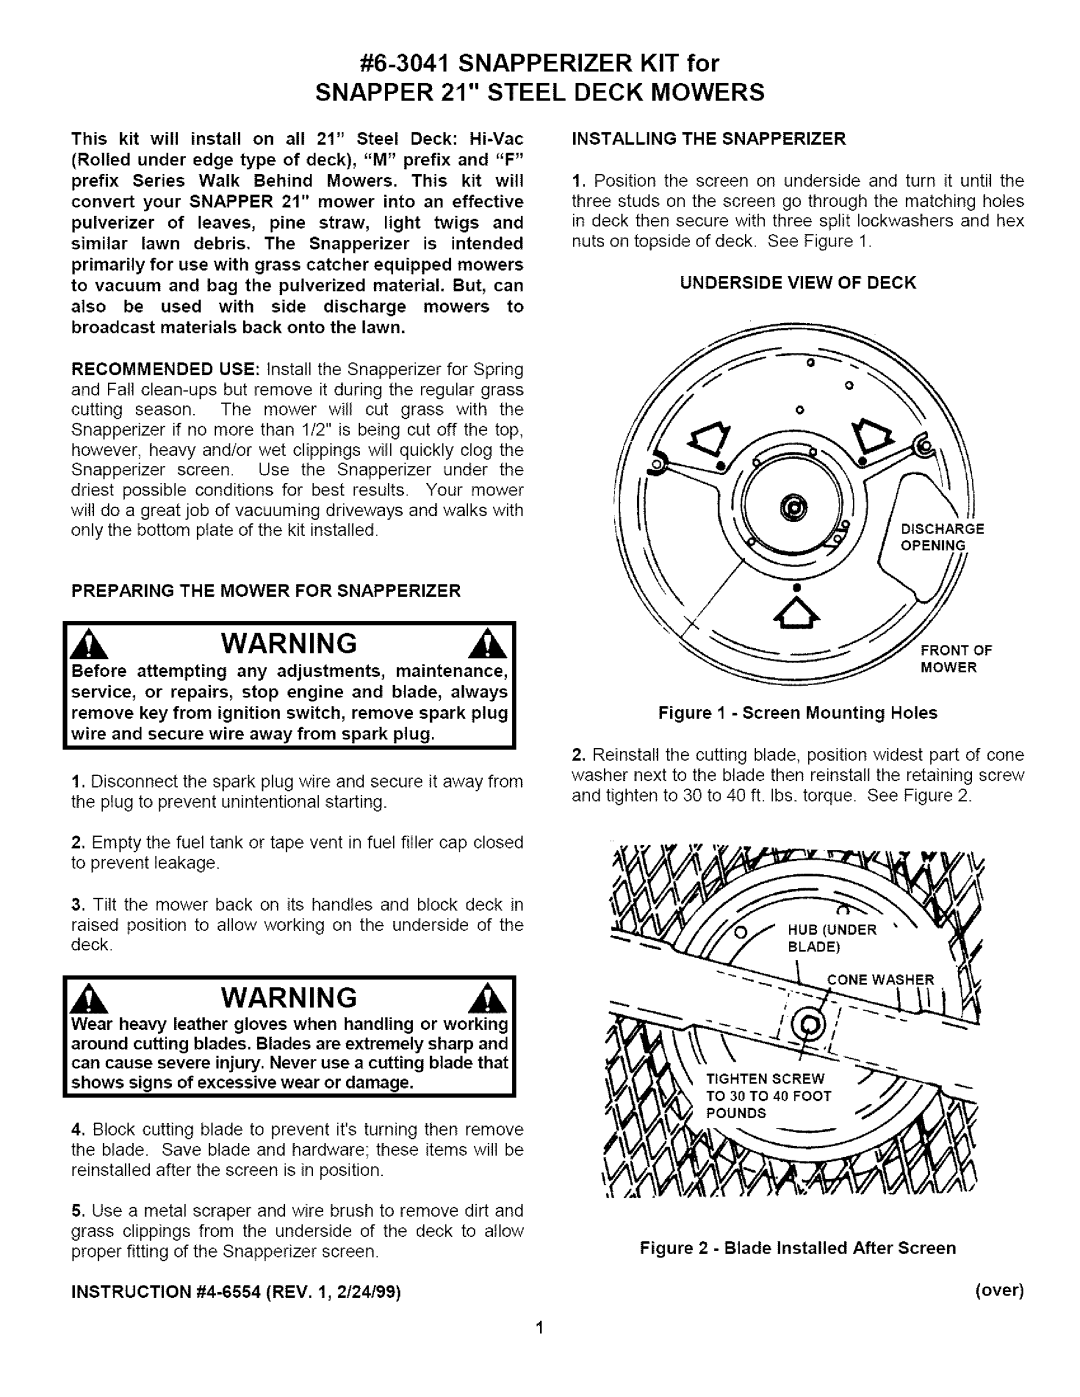 Sears manual #6-3041SNAPPERIZER KIT for, SNAPPER 21 STEEL DECK MOWERS, Warning Ai 